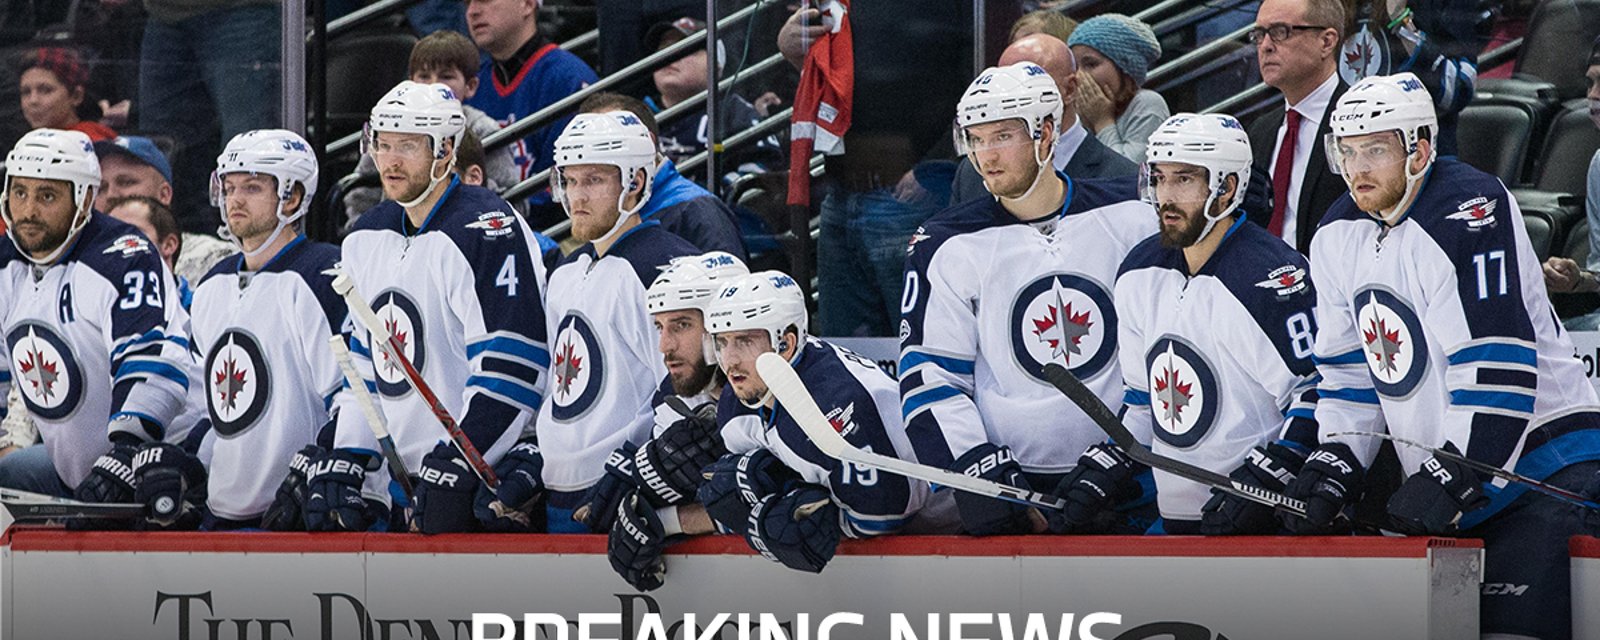 Breaking: Jets forward placed on IR